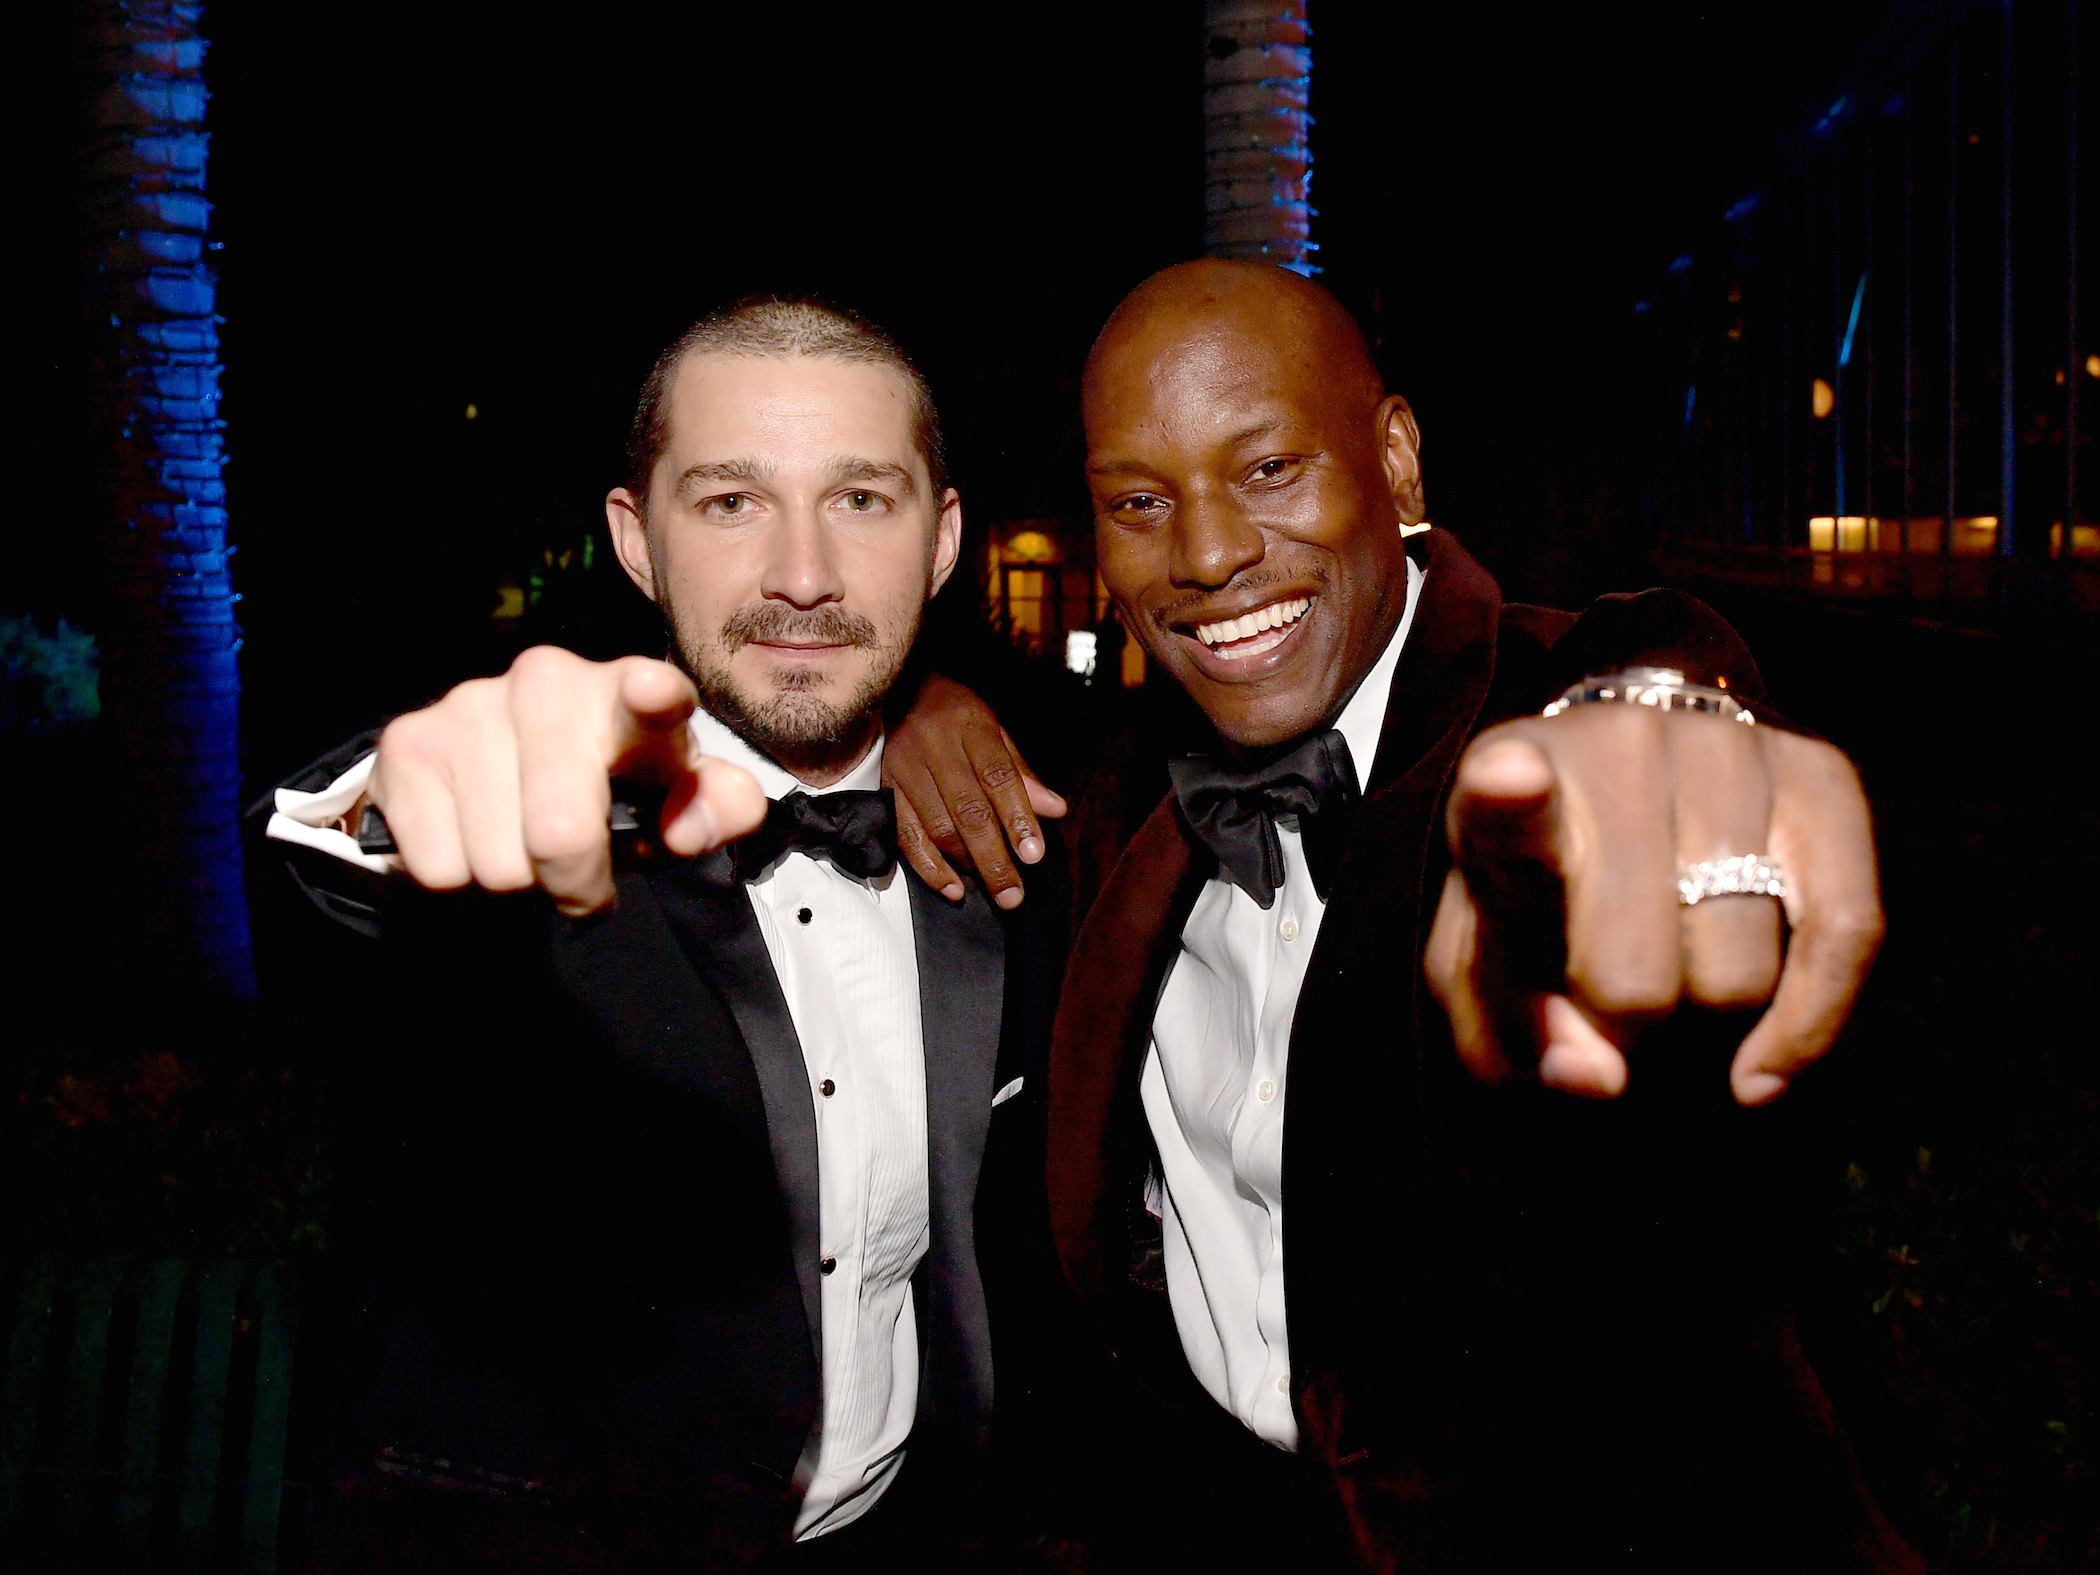 Shia LaBeouf (L) and Tyrese Gibson attend the 2020 Vanity Fair Oscar Party